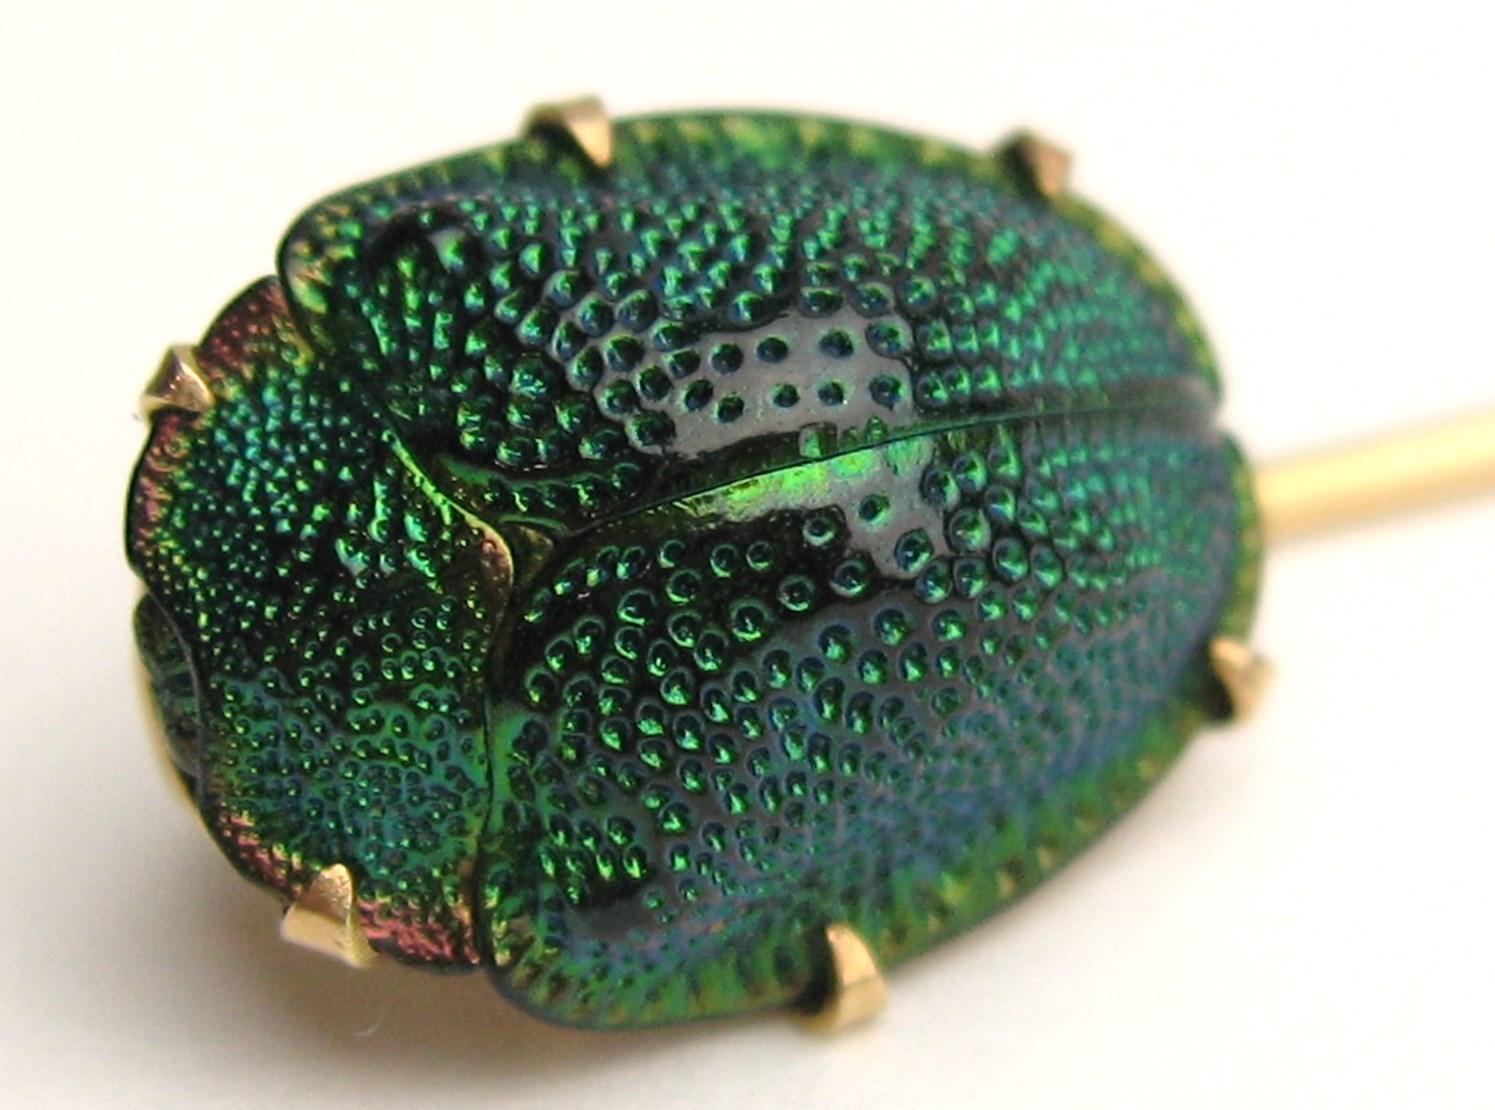 Victorian Egyptian Scarab Beetle Brooch Stick. Stunning Iridescent Green beetle scarab on this gold stick pin. 14K Gold. Measuring 2.54 in. top to bottom. Scarab measures .46 in. x .56 in. Please be sure to check our storefront for more jewelry as